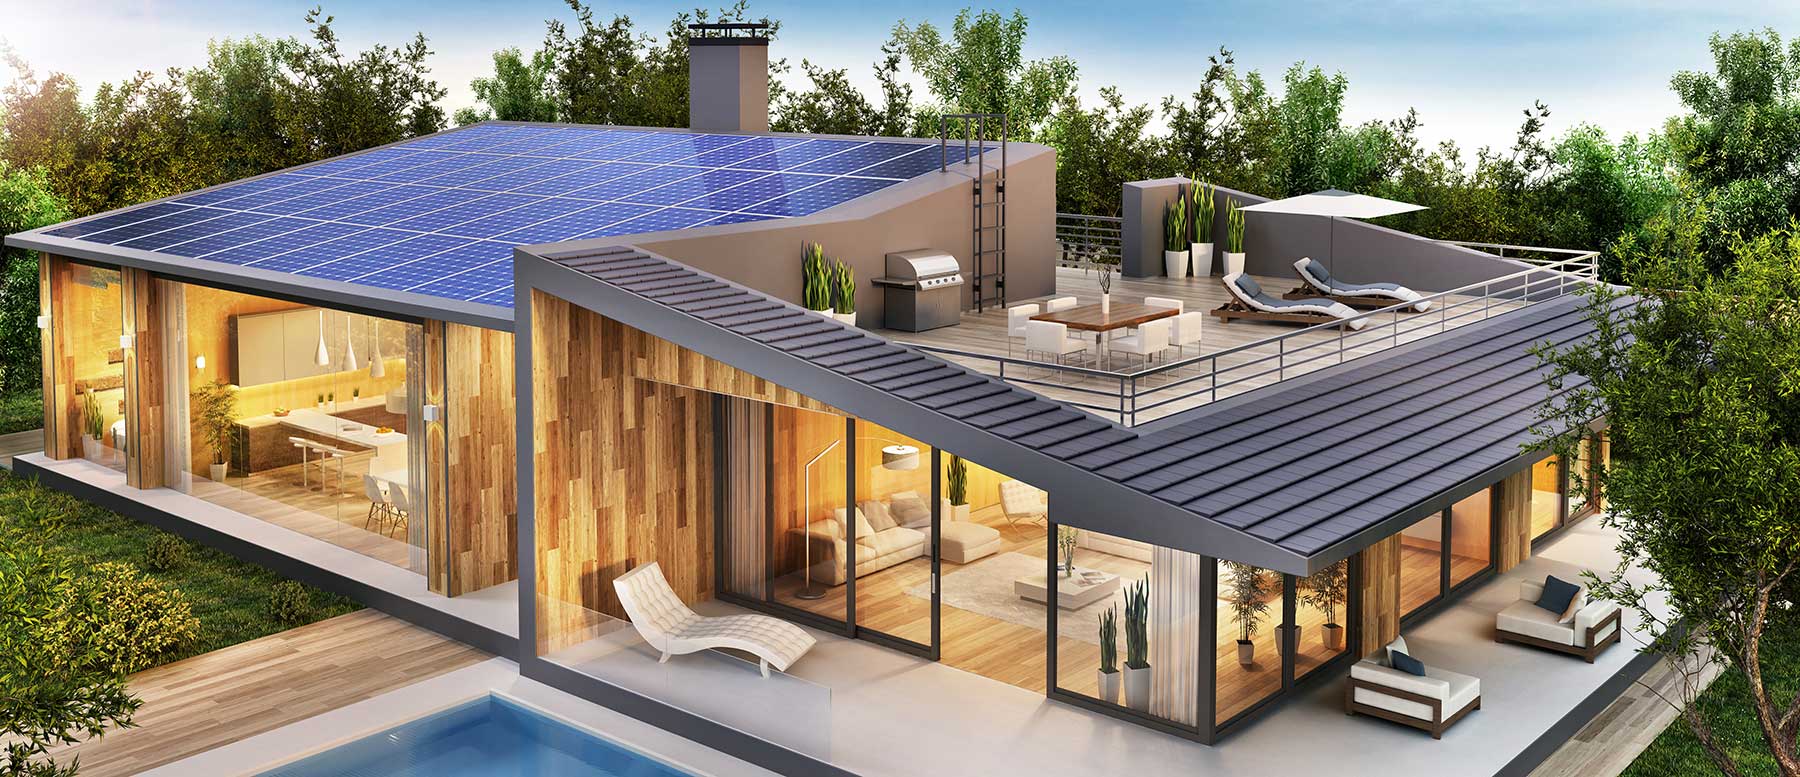 All about the luxury smart home of the future